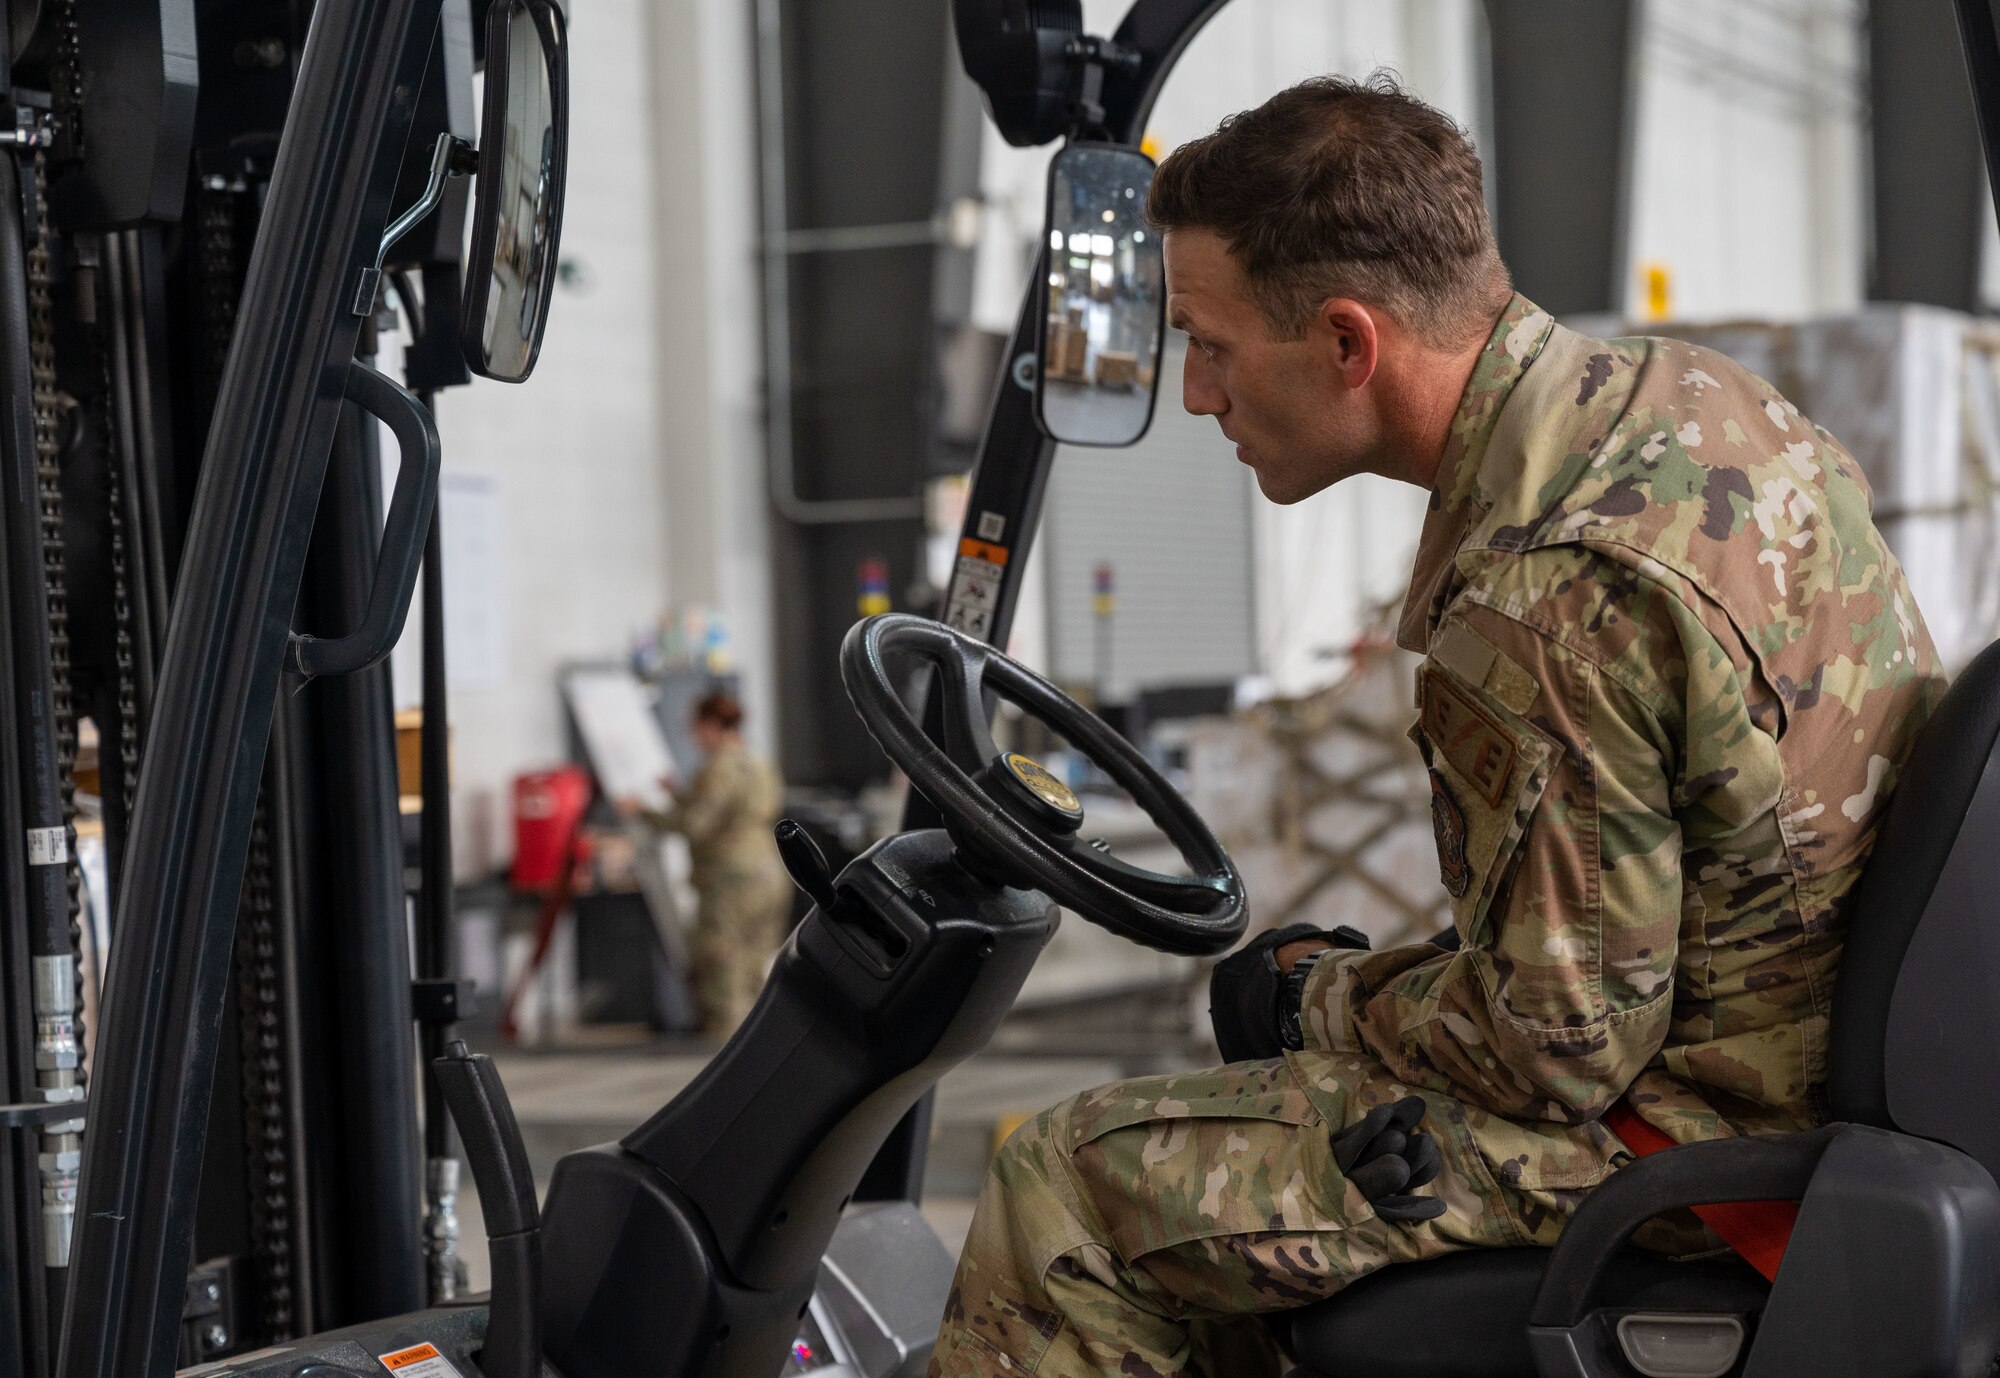 Airman 1st Class Walter Blume, 436th Maintenance Squadron electrical and environmental apprentice, operates a forklift at Dover Air Force Base, Delaware, Sept. 9, 2022. Blume is one of several 436th MXS Airmen that augmented at the 436th Aerial Port Squadron to help alleviate their recent 300% mission surge. The augmentation implements Gen. Charles Q. Brown Jr. 's “Accelerate Change or Lose” action order  by utilizing multi-capable Airmen. (U.S. Air Force photo by Senior Airman Cydney Lee)